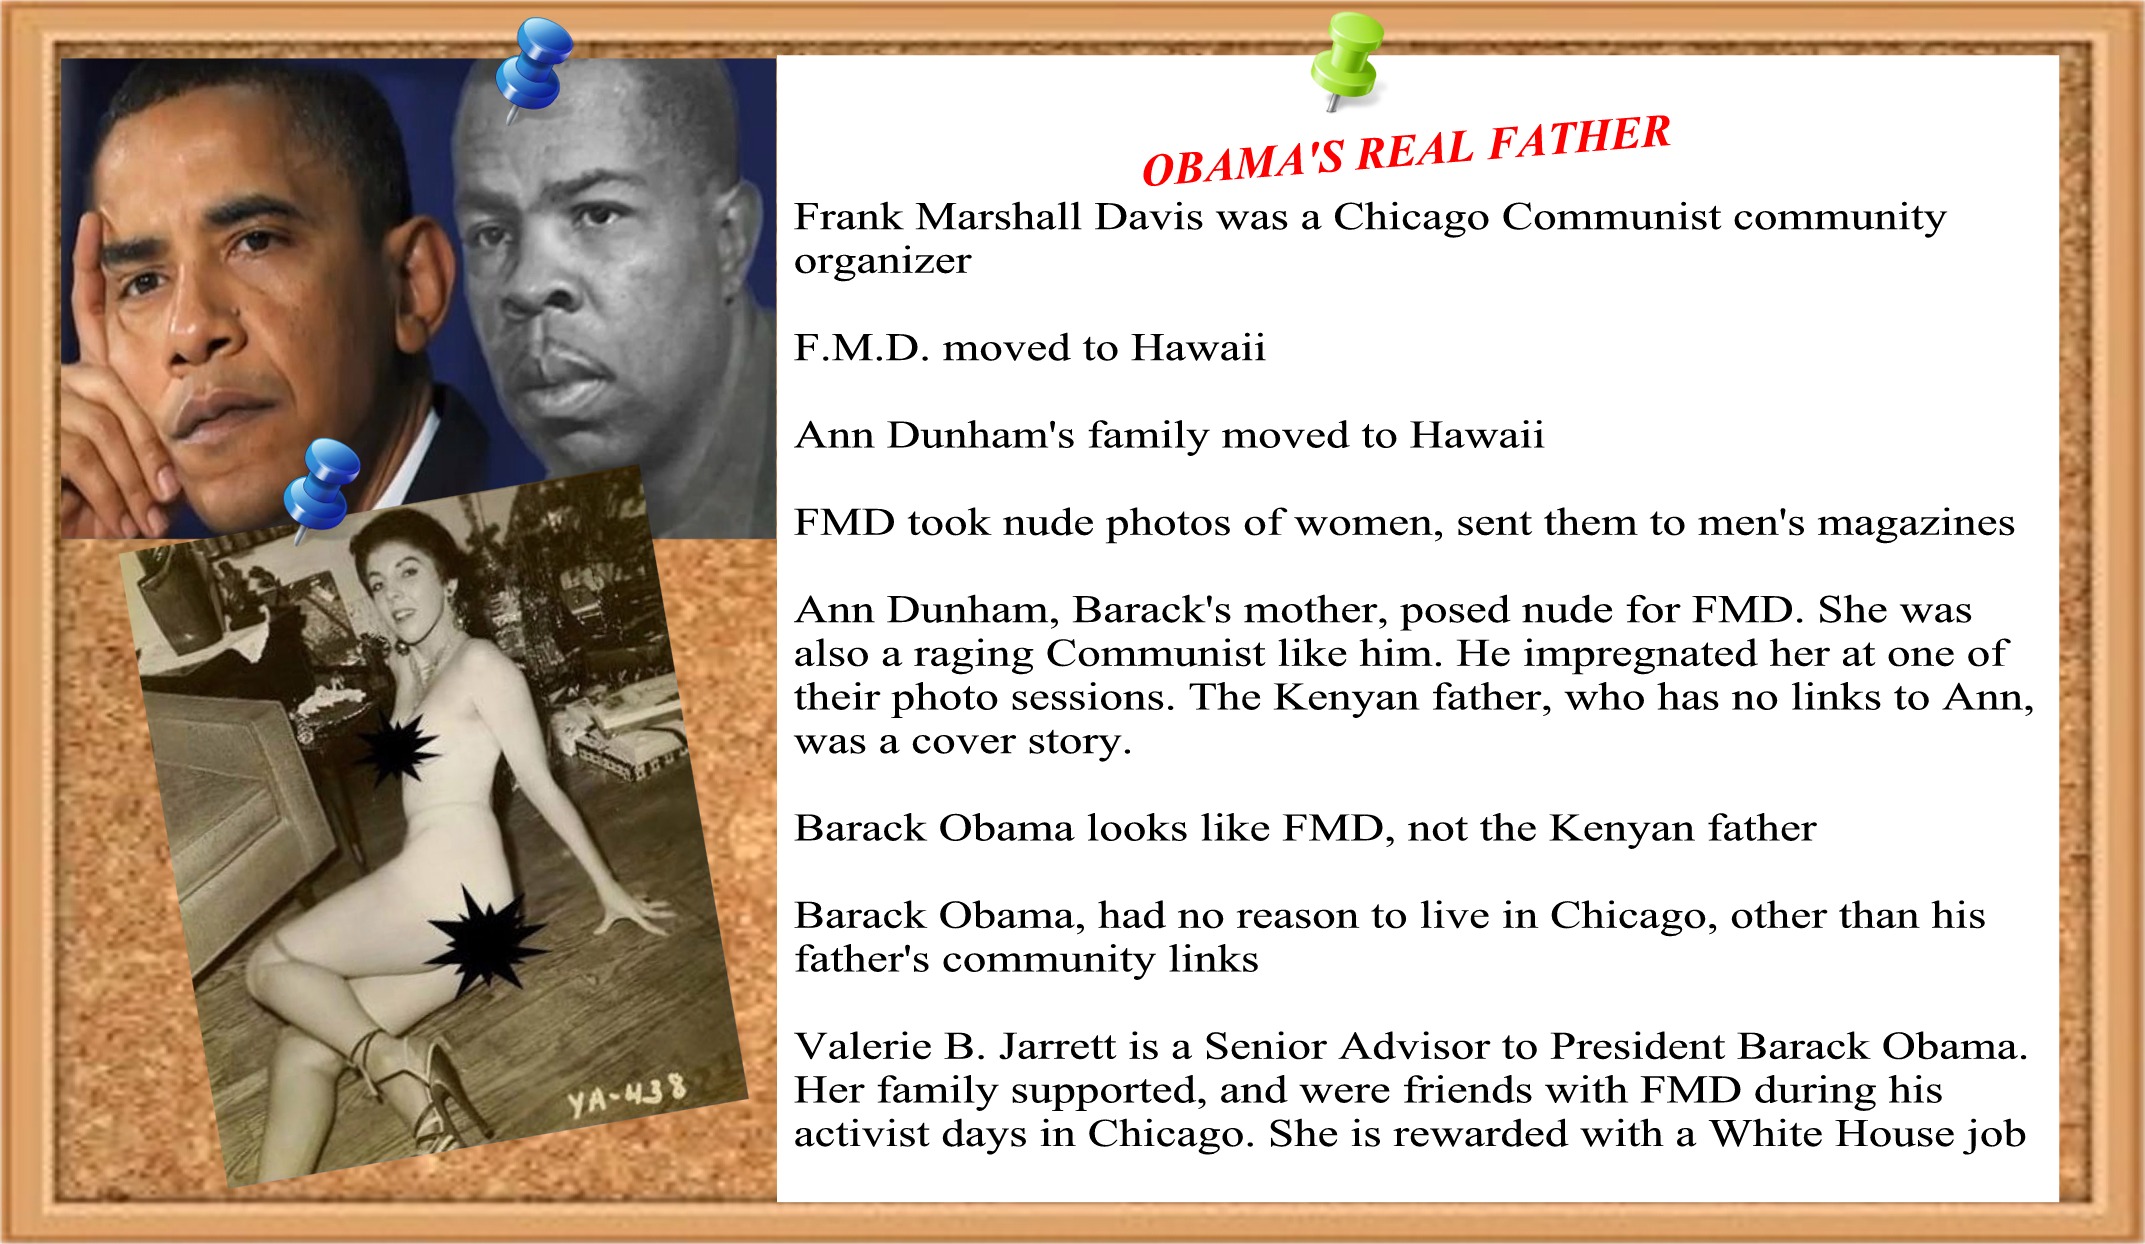 Note: Ann Dunhams' father was CIA assigned to watch over Communist F.M.D. The Kenyan father story was to cover up the embarrassment of having his daughter knocked up by the man he was supposed to be monitoring.